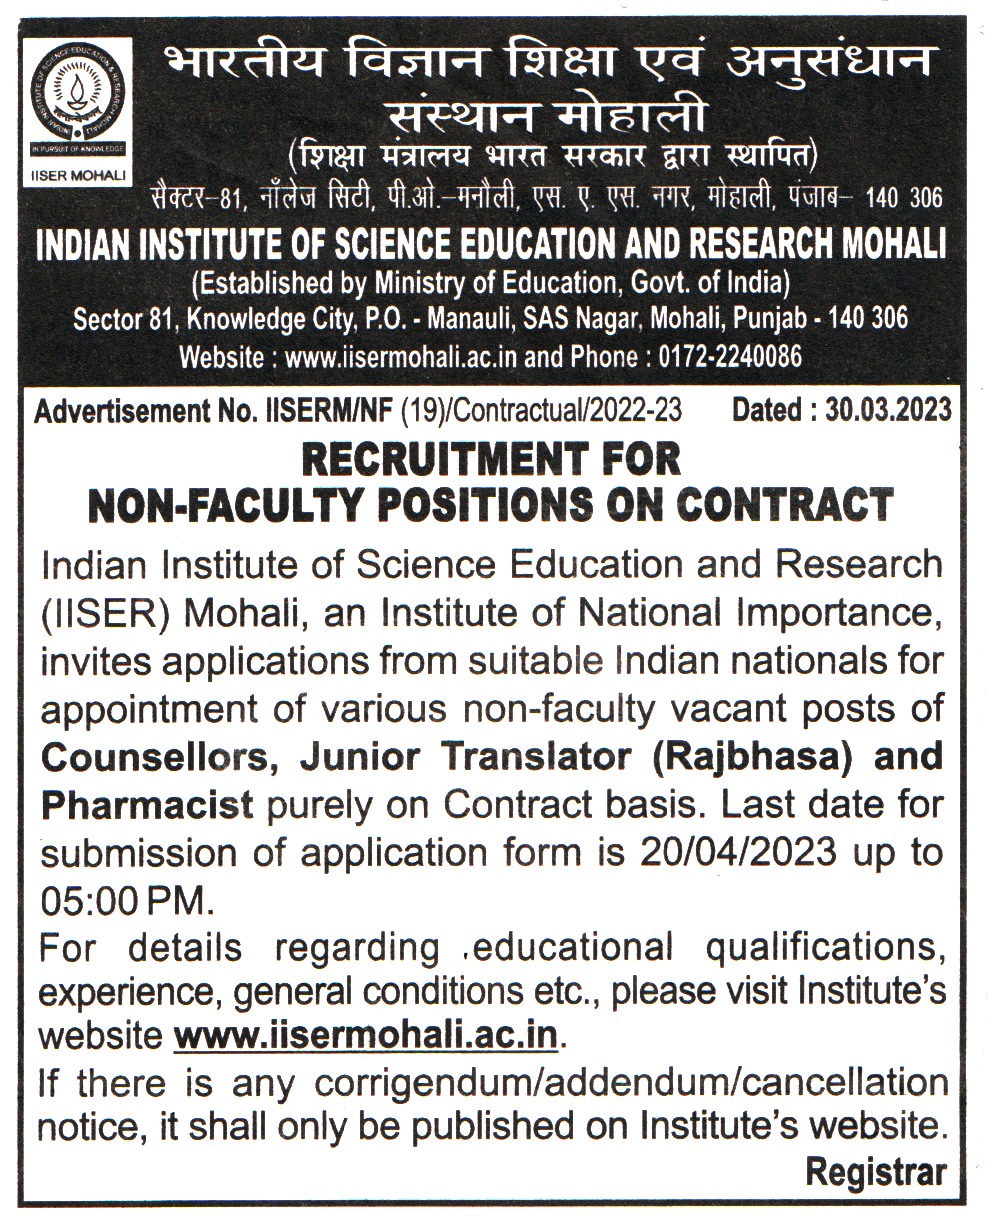 College Jobs Indian Institute of Science Education and Research (IISER) Mohali Recruitment